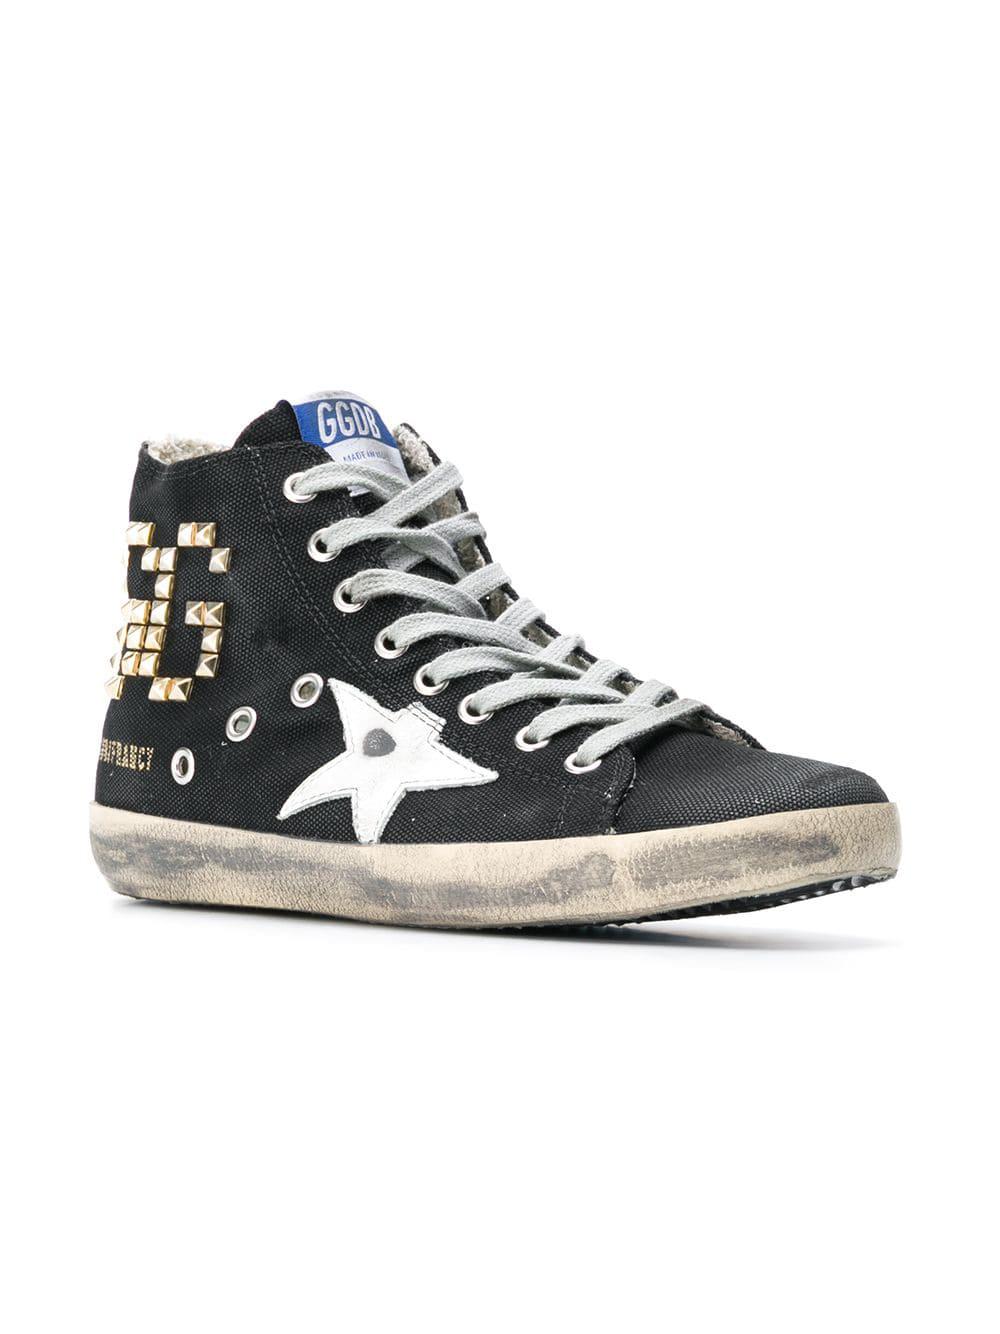 Golden Goose Deluxe Brand Synthetic Black Canvas Studded Francy